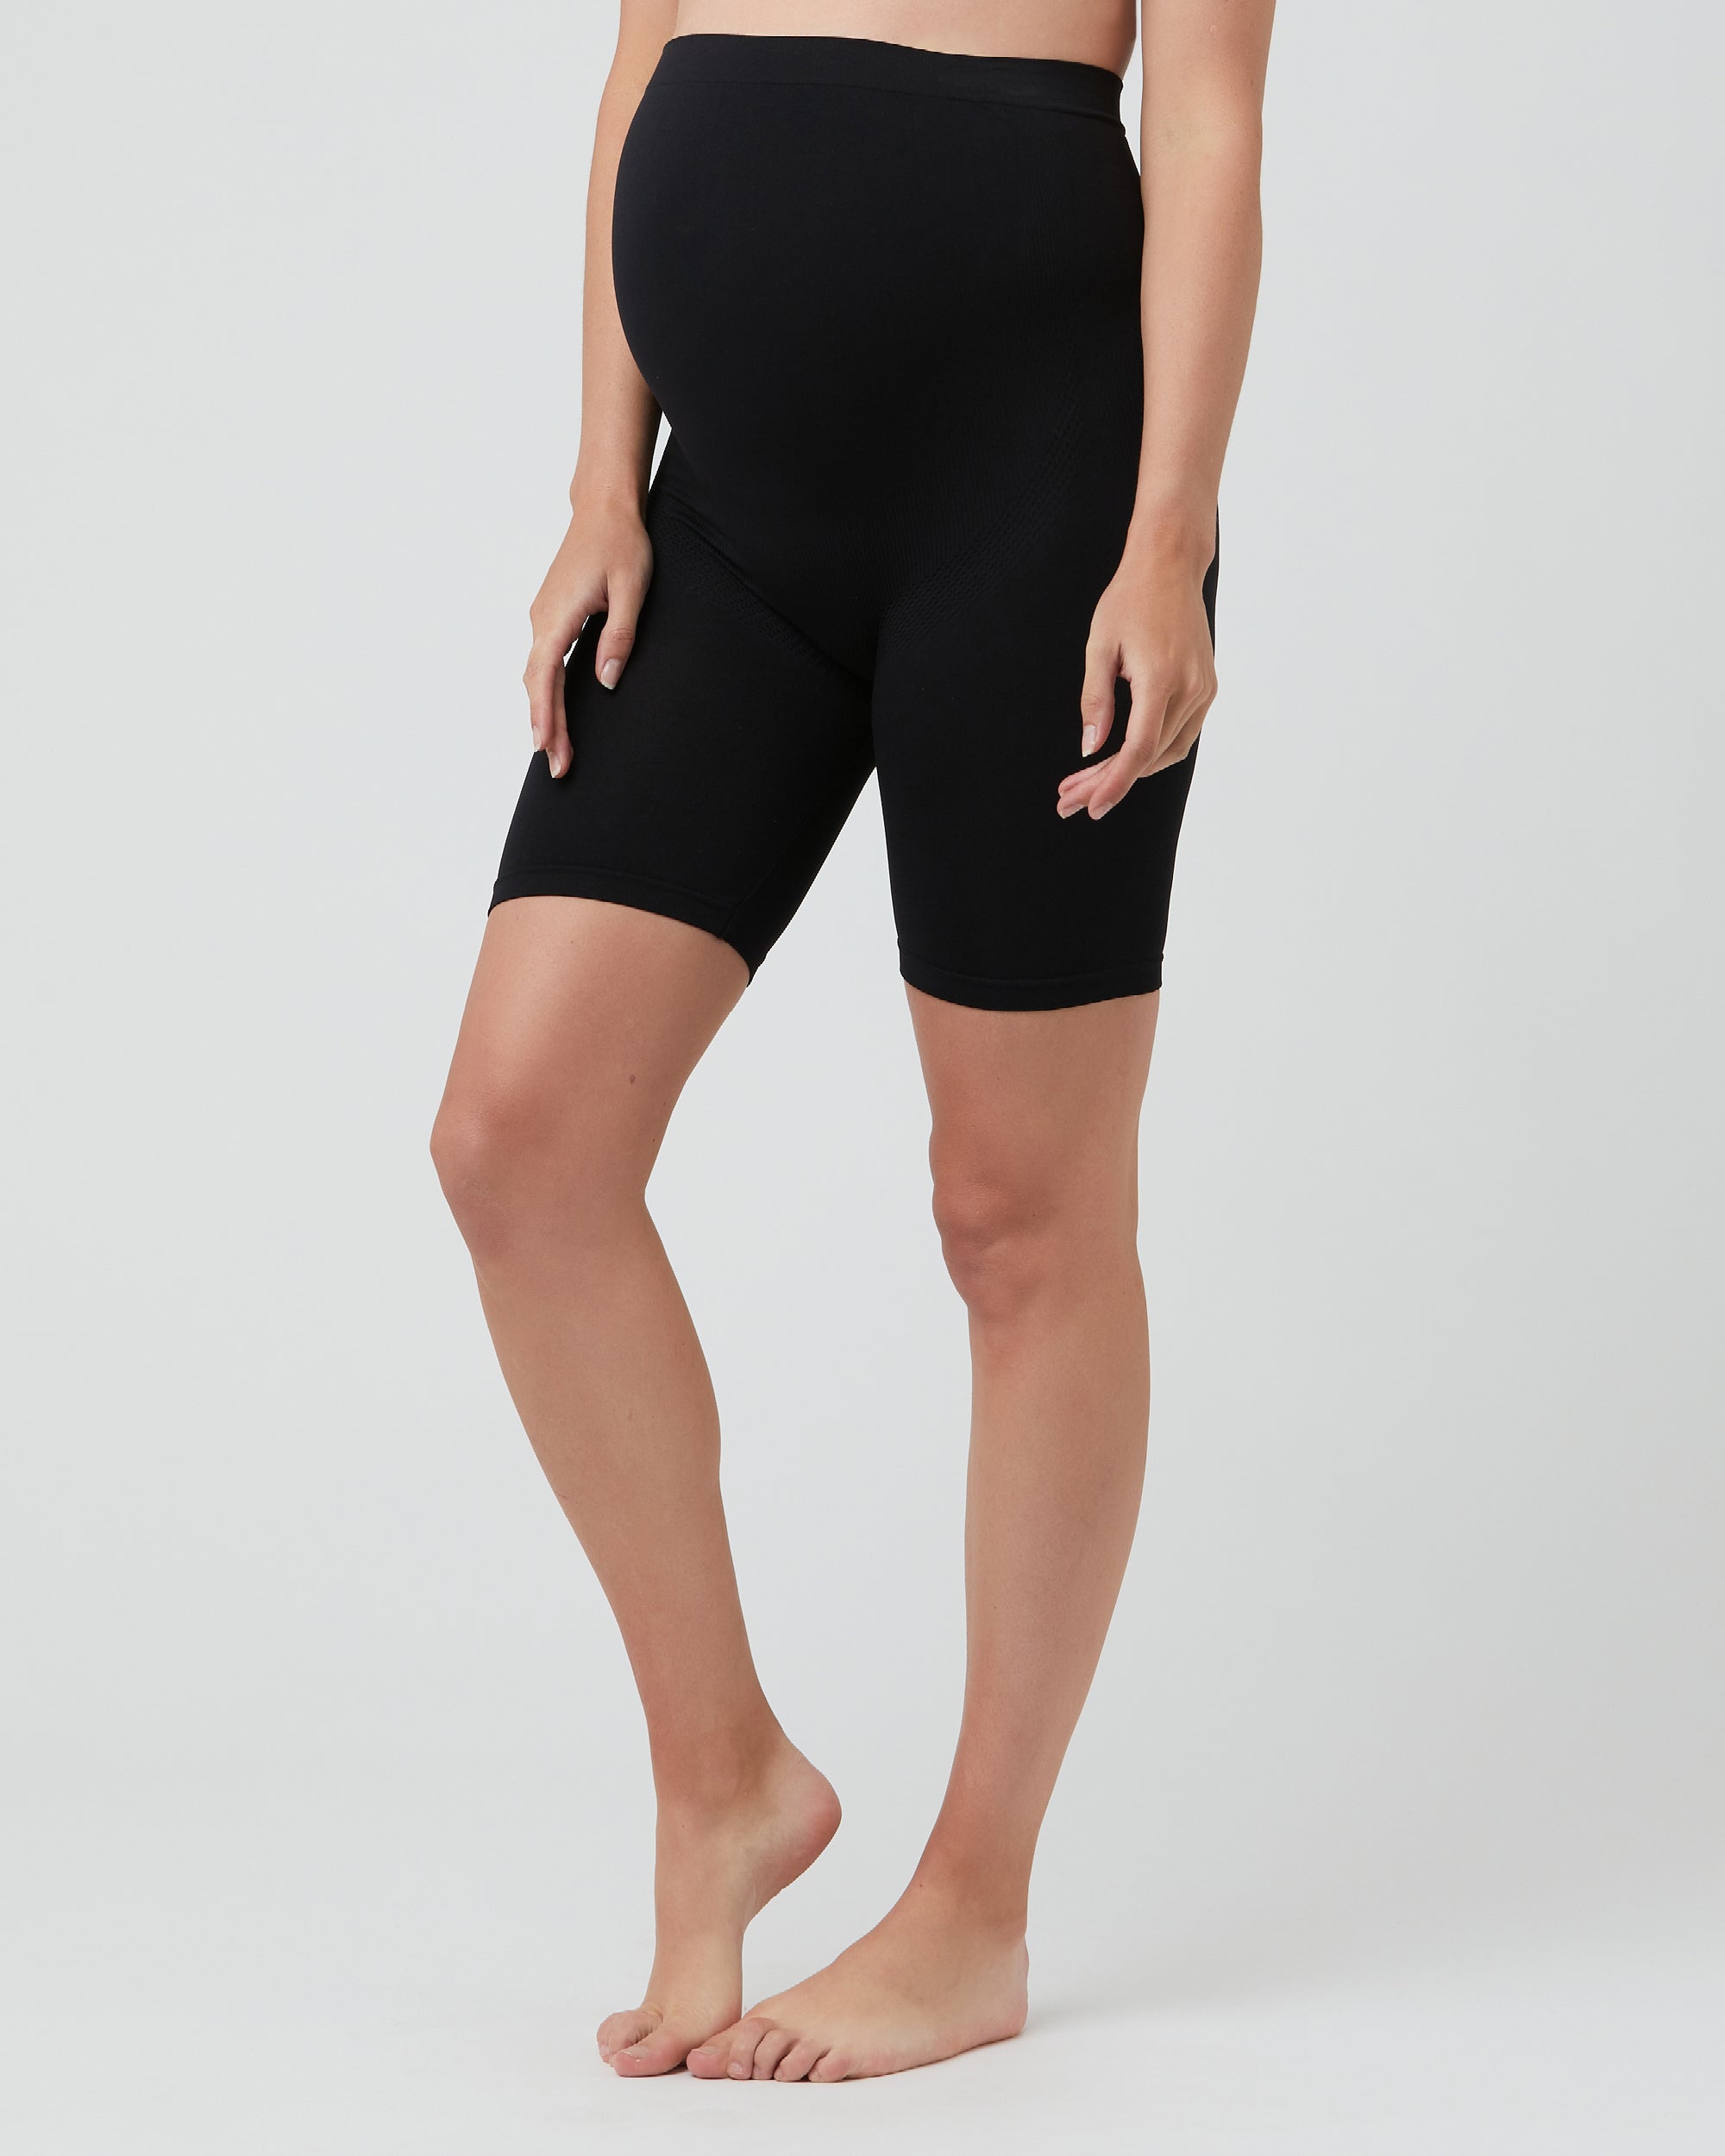 Buy SHAPERX Shorts Maternity Leggings Over The Belly Pregnancy Maternity  Pants with Extra Back Support (Black) (Size) 2XL at